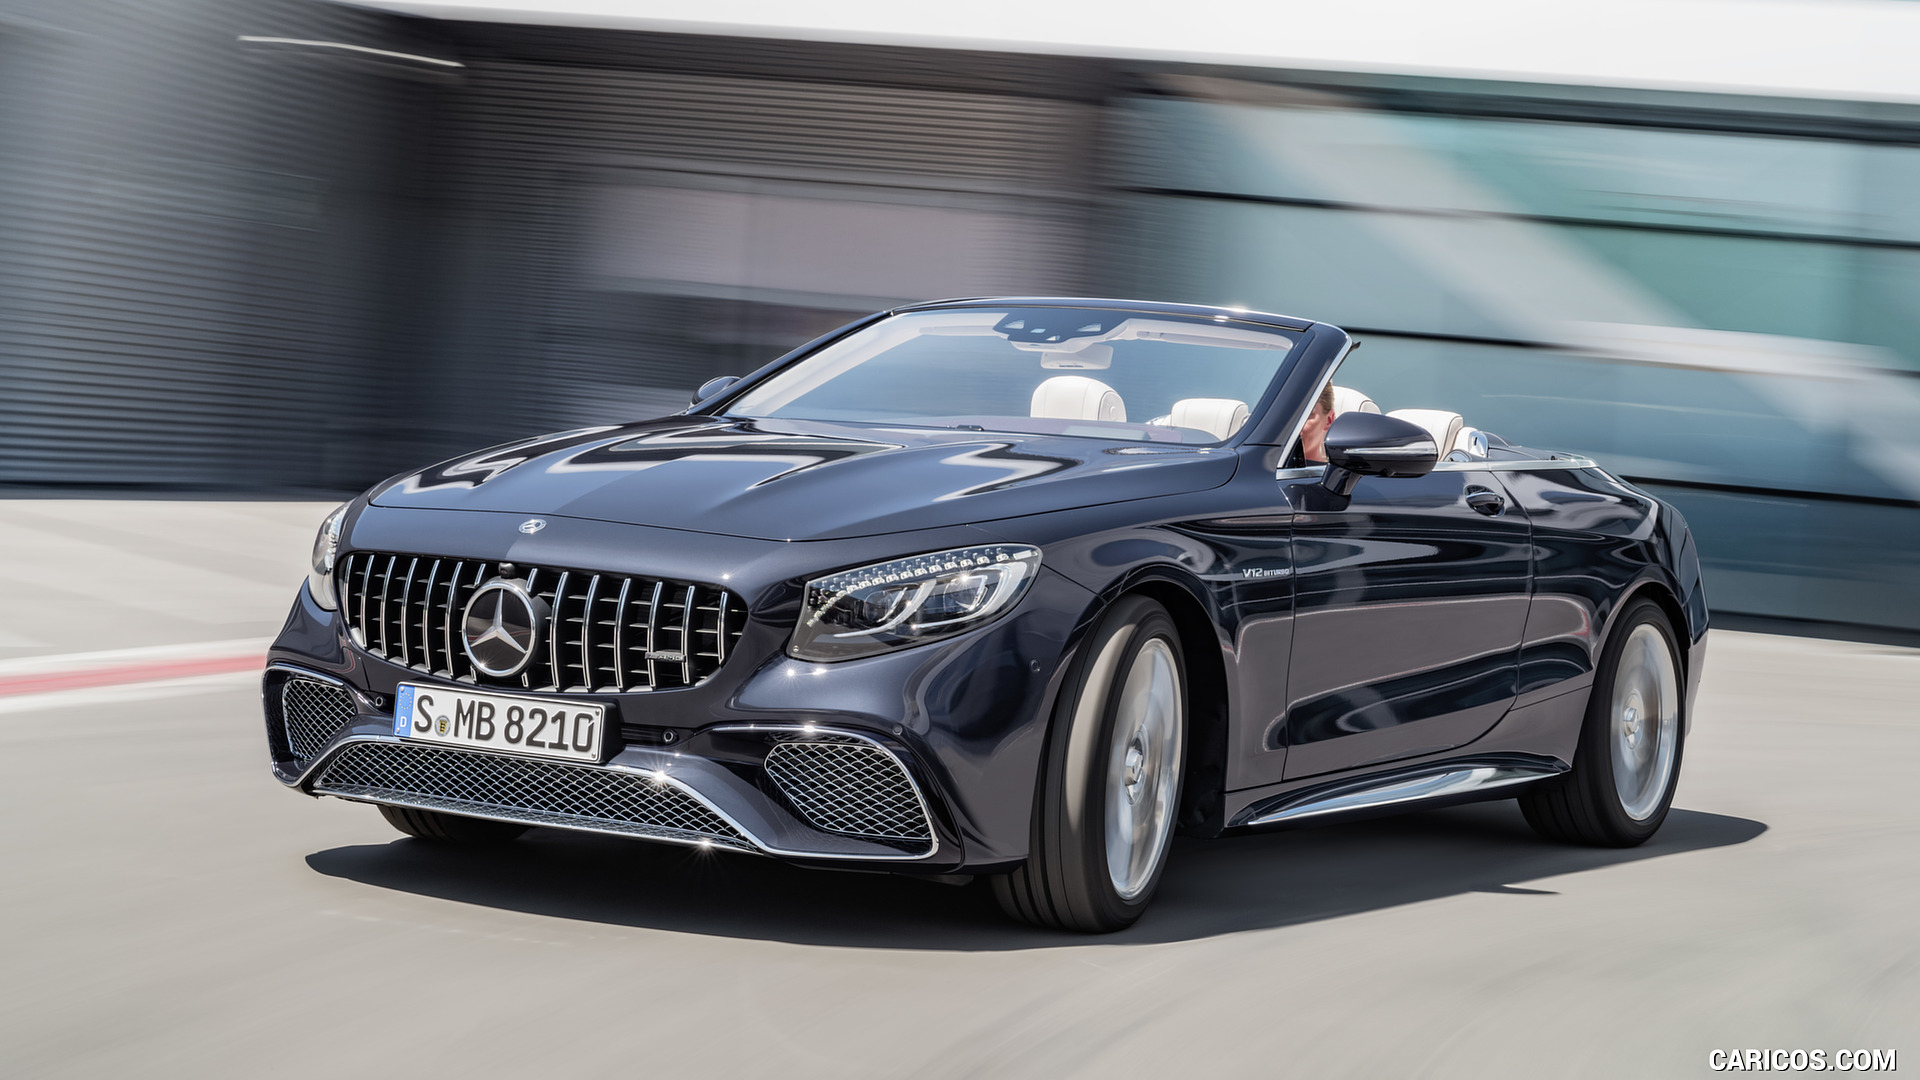 2018 Mercedes-AMG S65 Coupe and Cabriolet